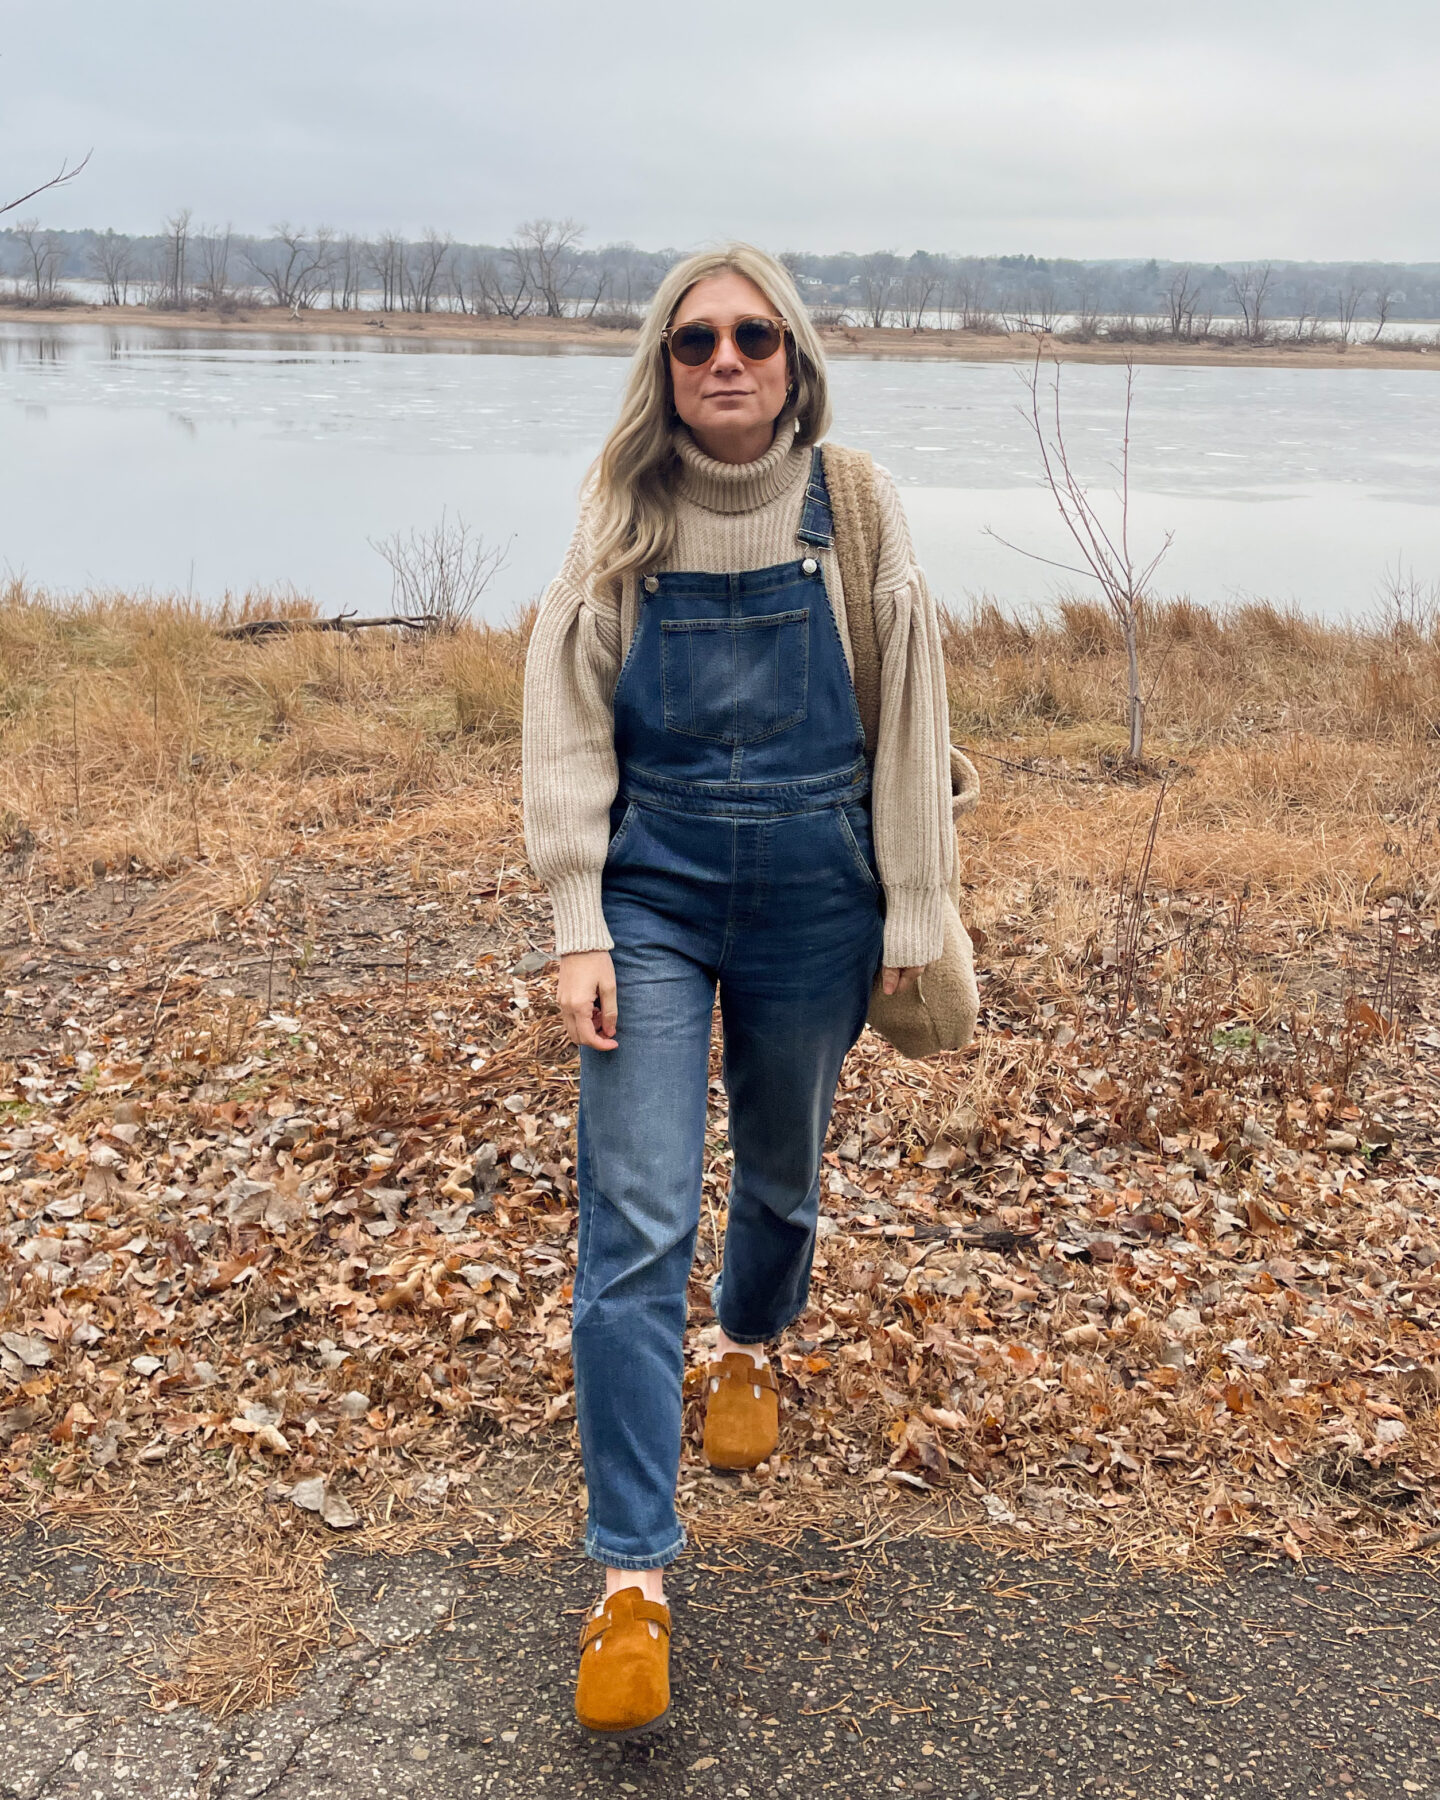 Karin Emily wears a statement sleeve turtleneck sweater and overalls from free assembly at walmart paired with birkenstock shearling clogs and a sherpa bag